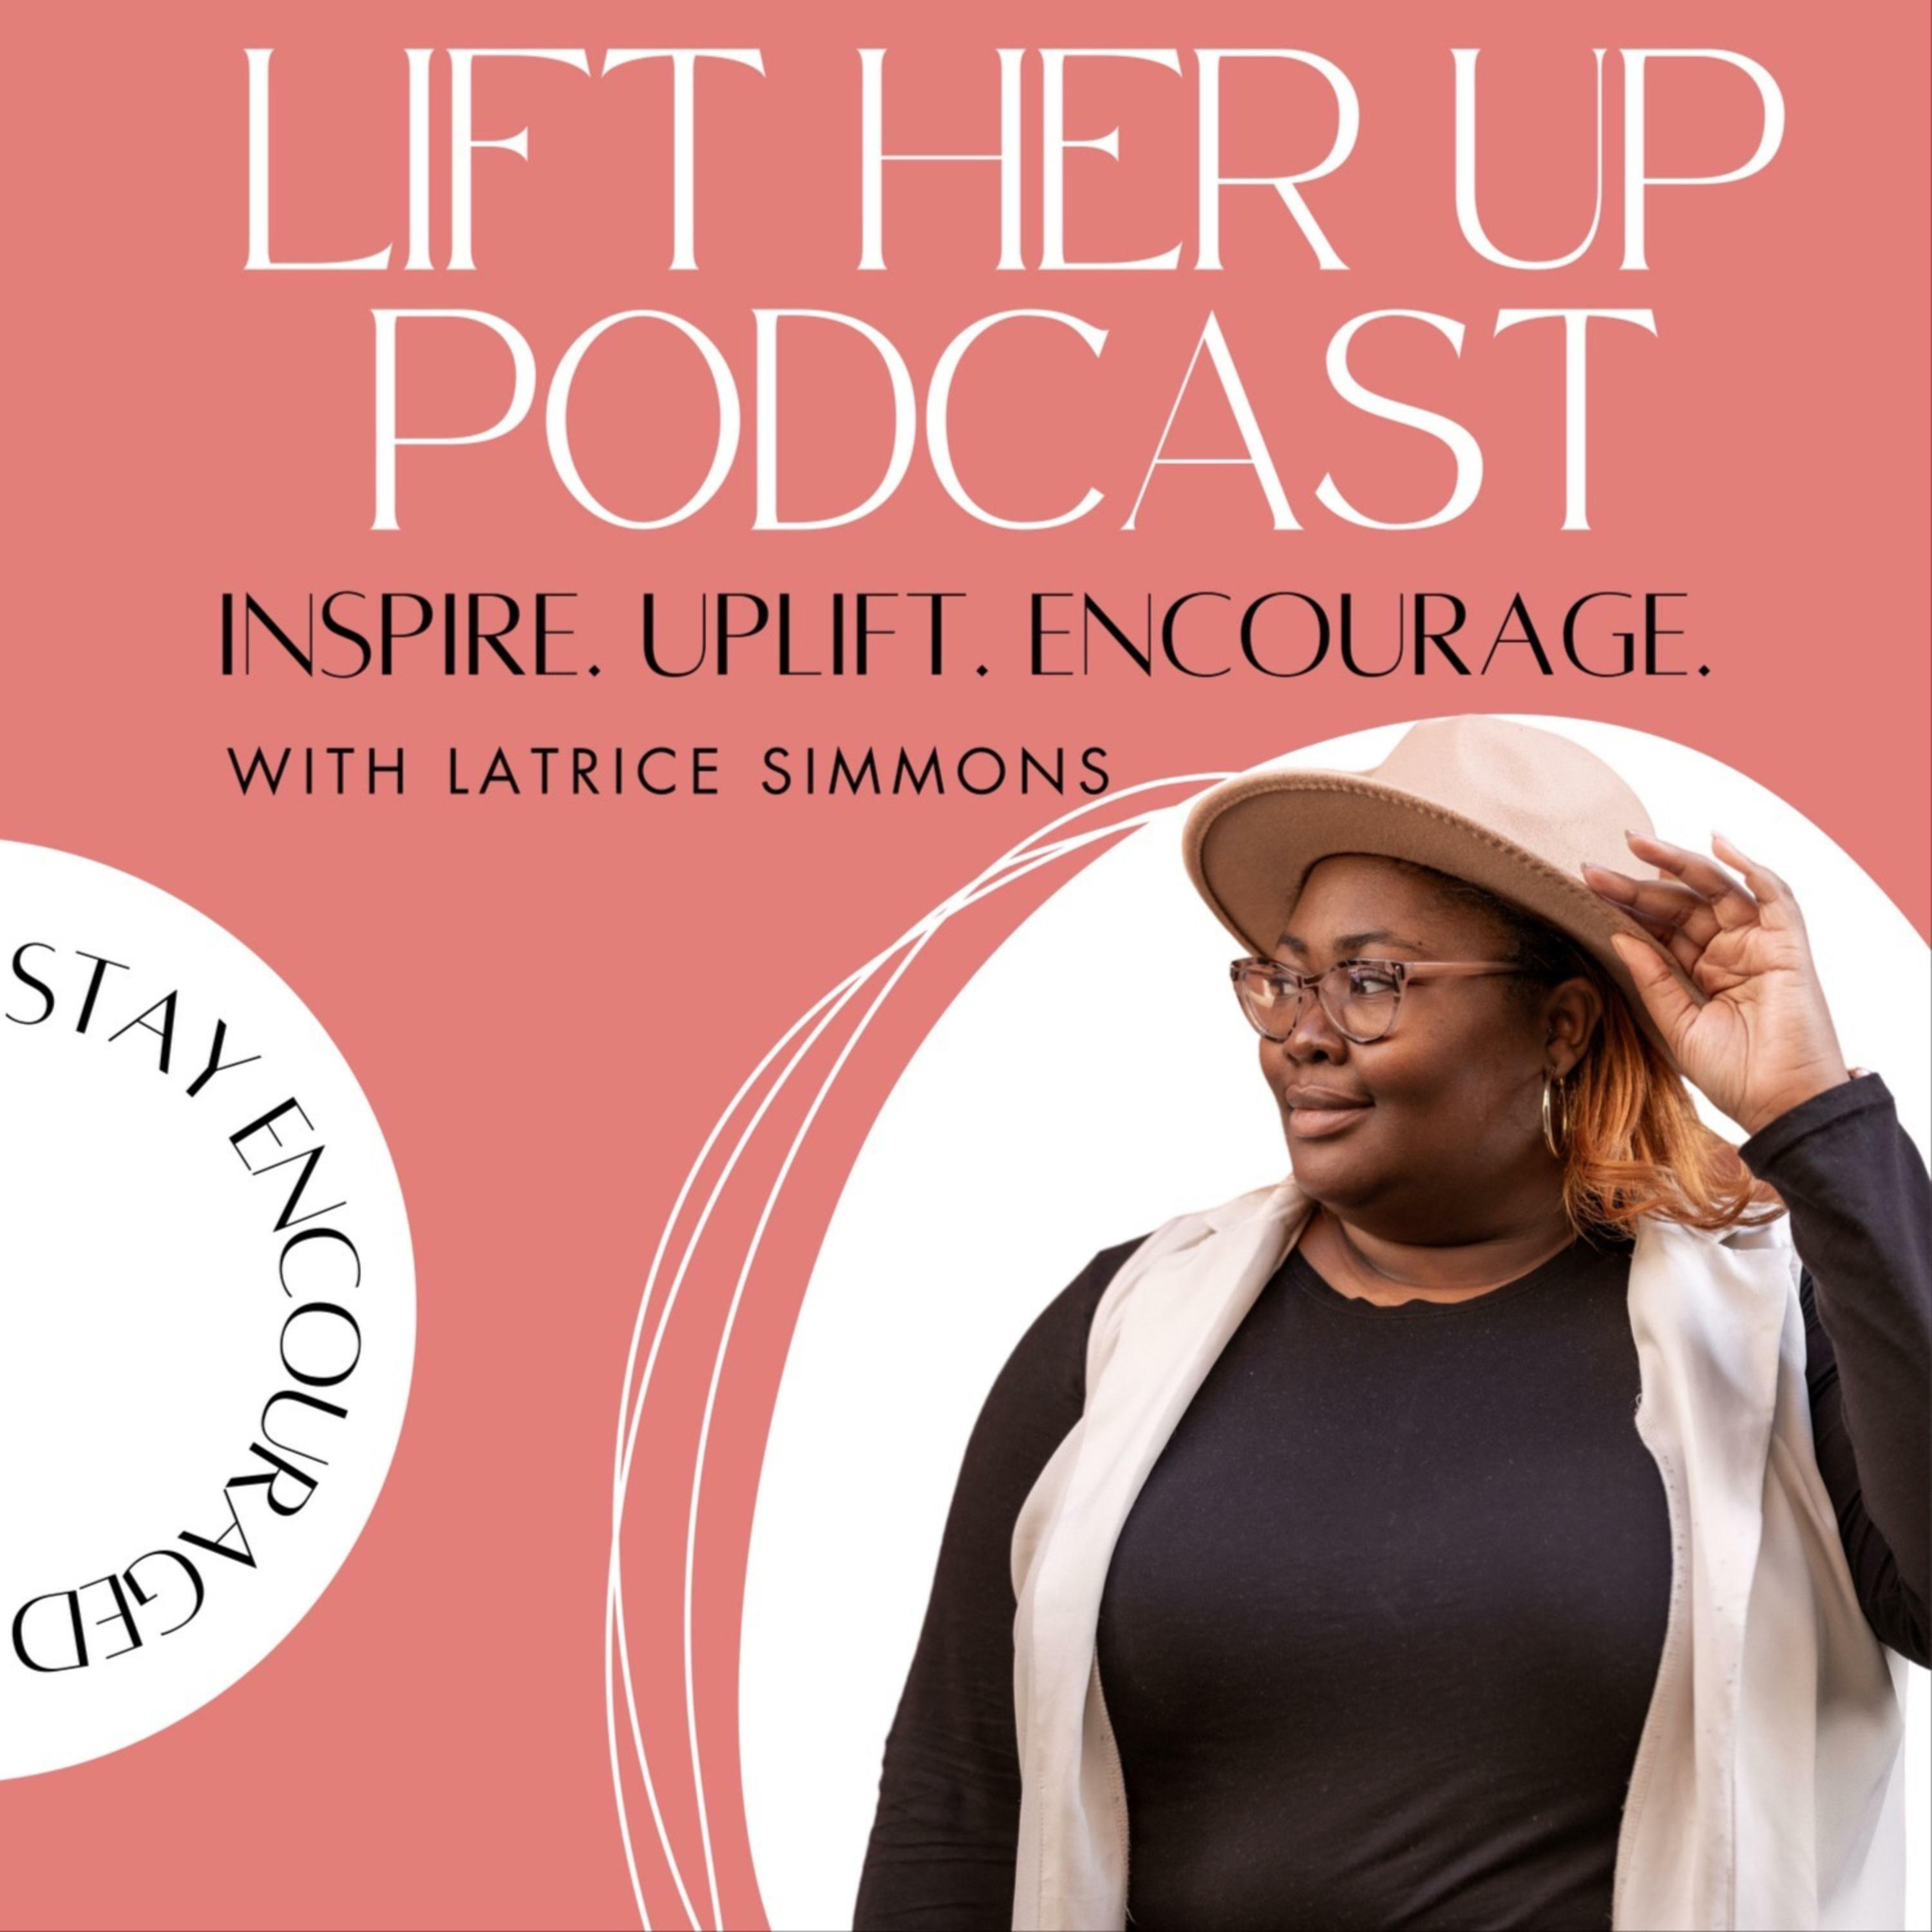 Lift Her Up Podcast